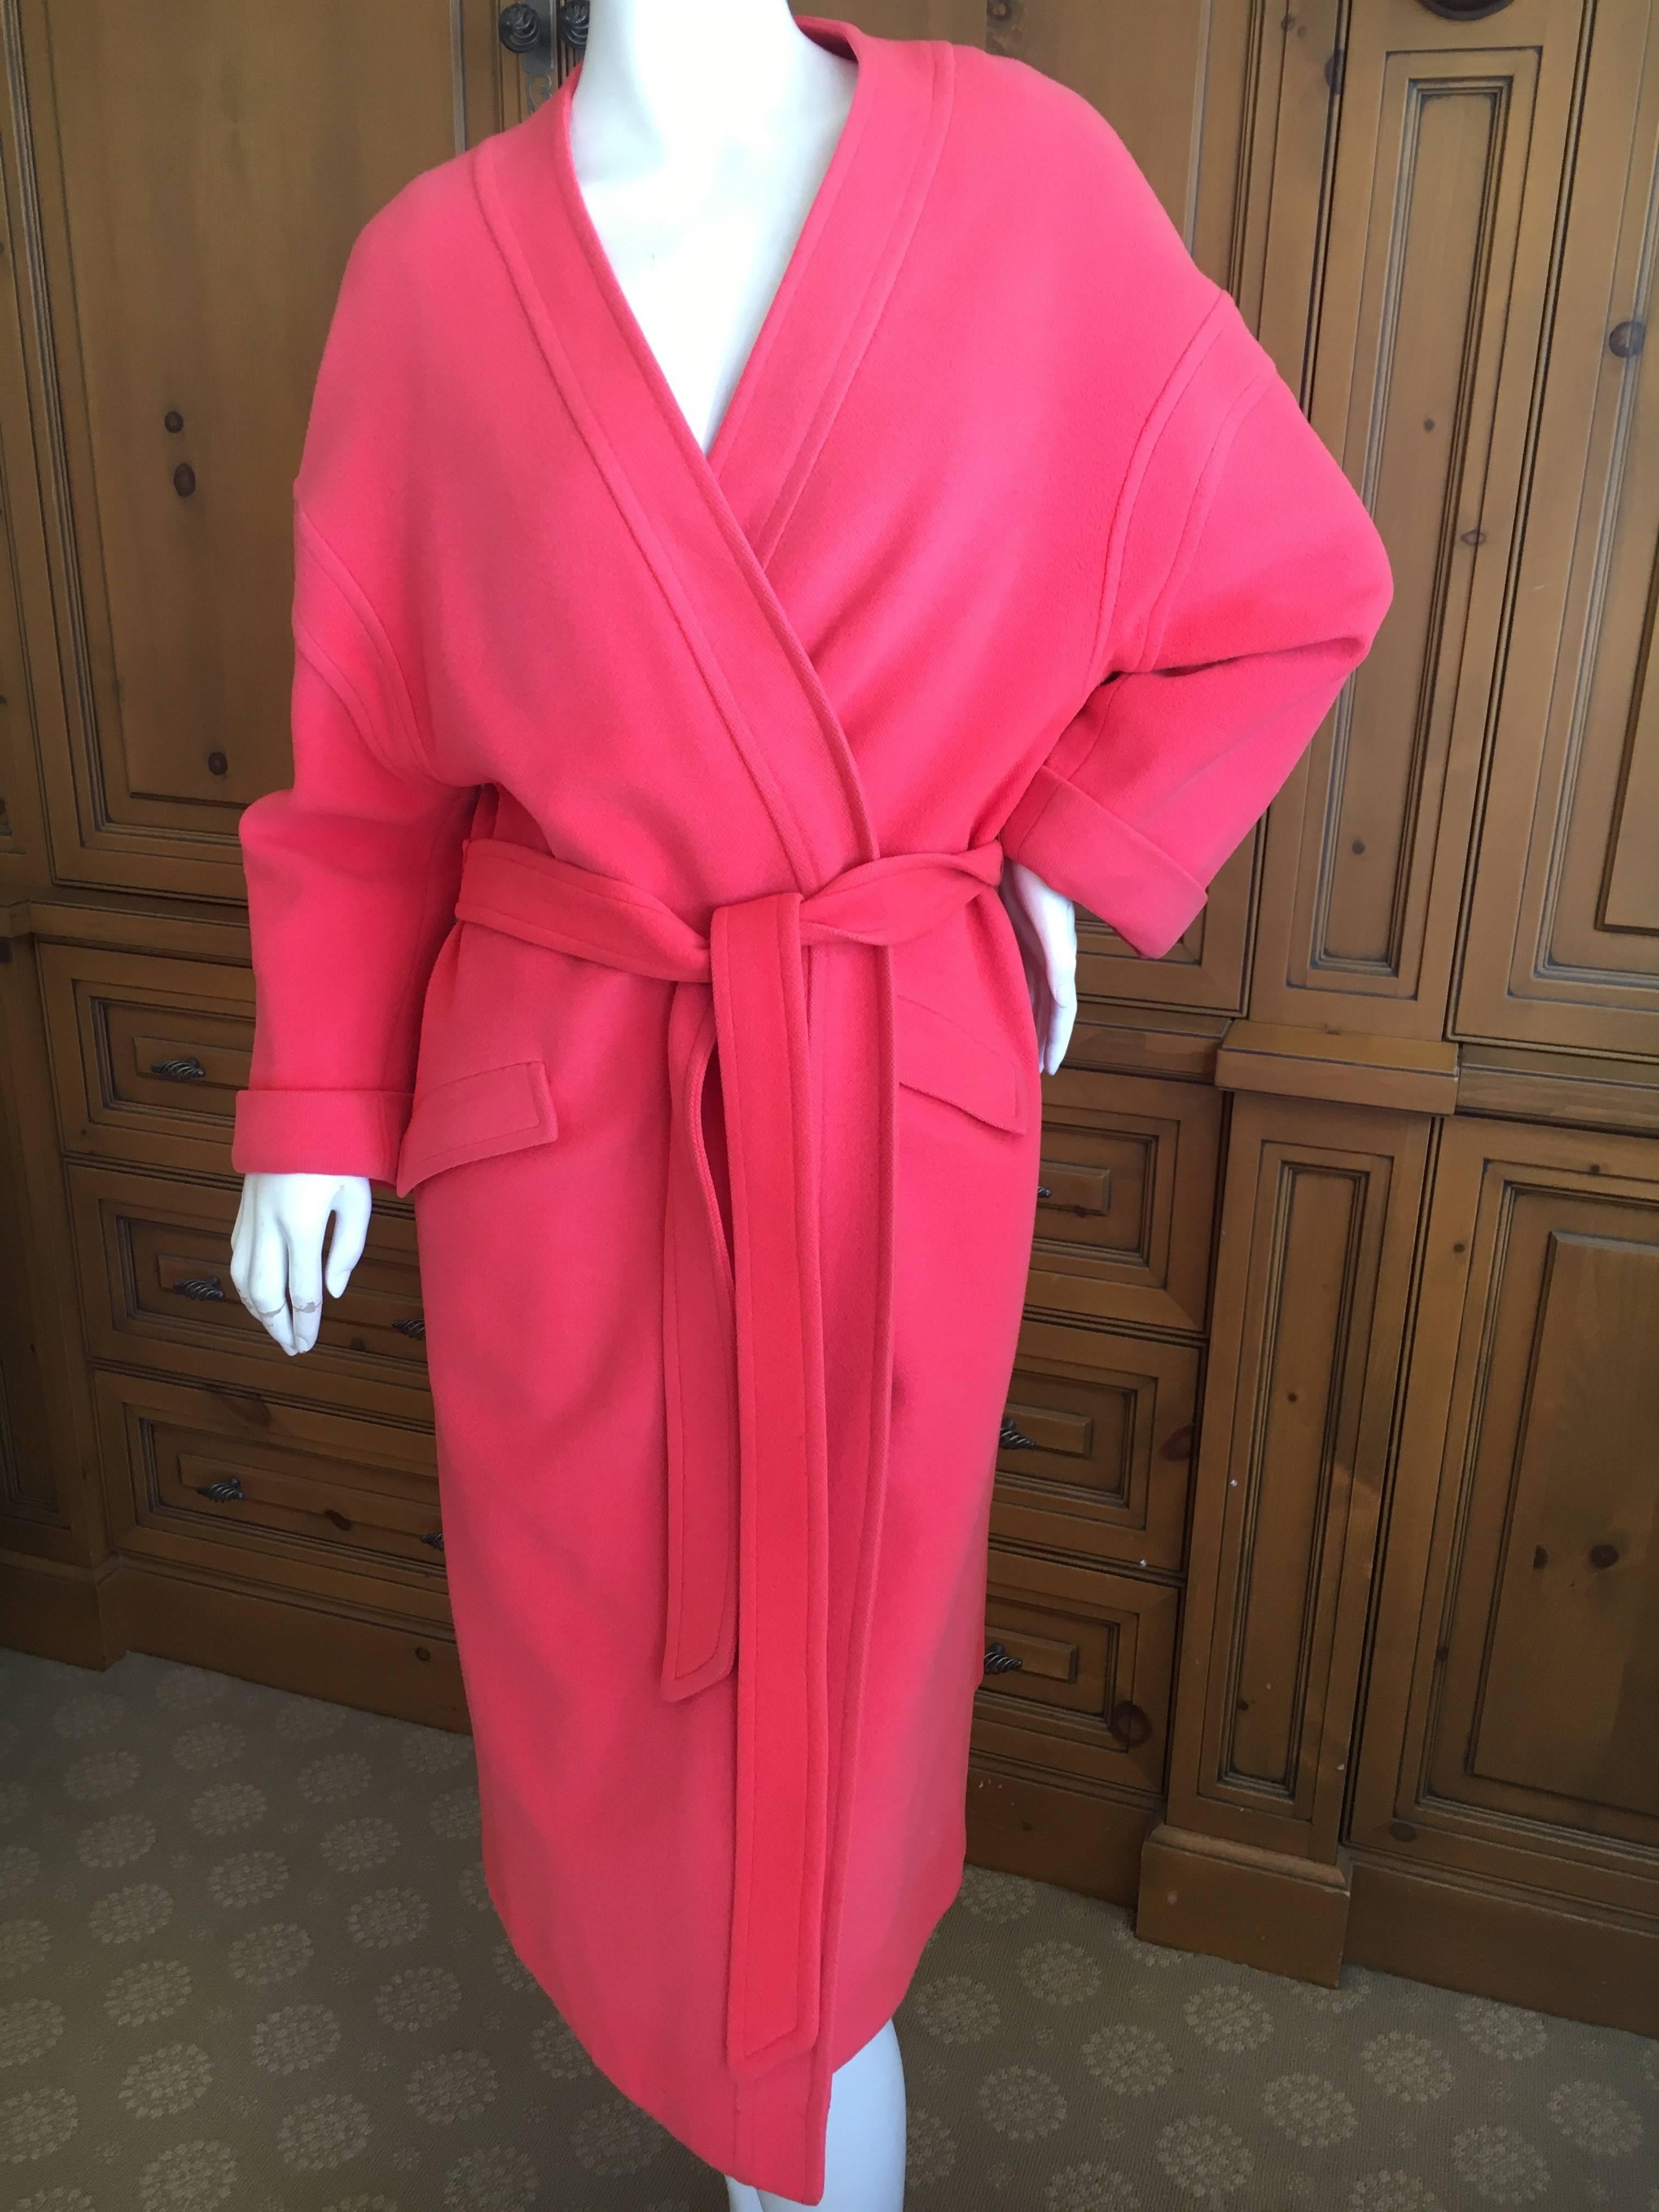 Elizabeth Arden 1960's Tangerine Pure Cashmere Belted Wrap Coat.
This is very sweet , a rich salmon pink, with belt.
Bust 46"
Waist 46"
Length 44"
Excellent conditon